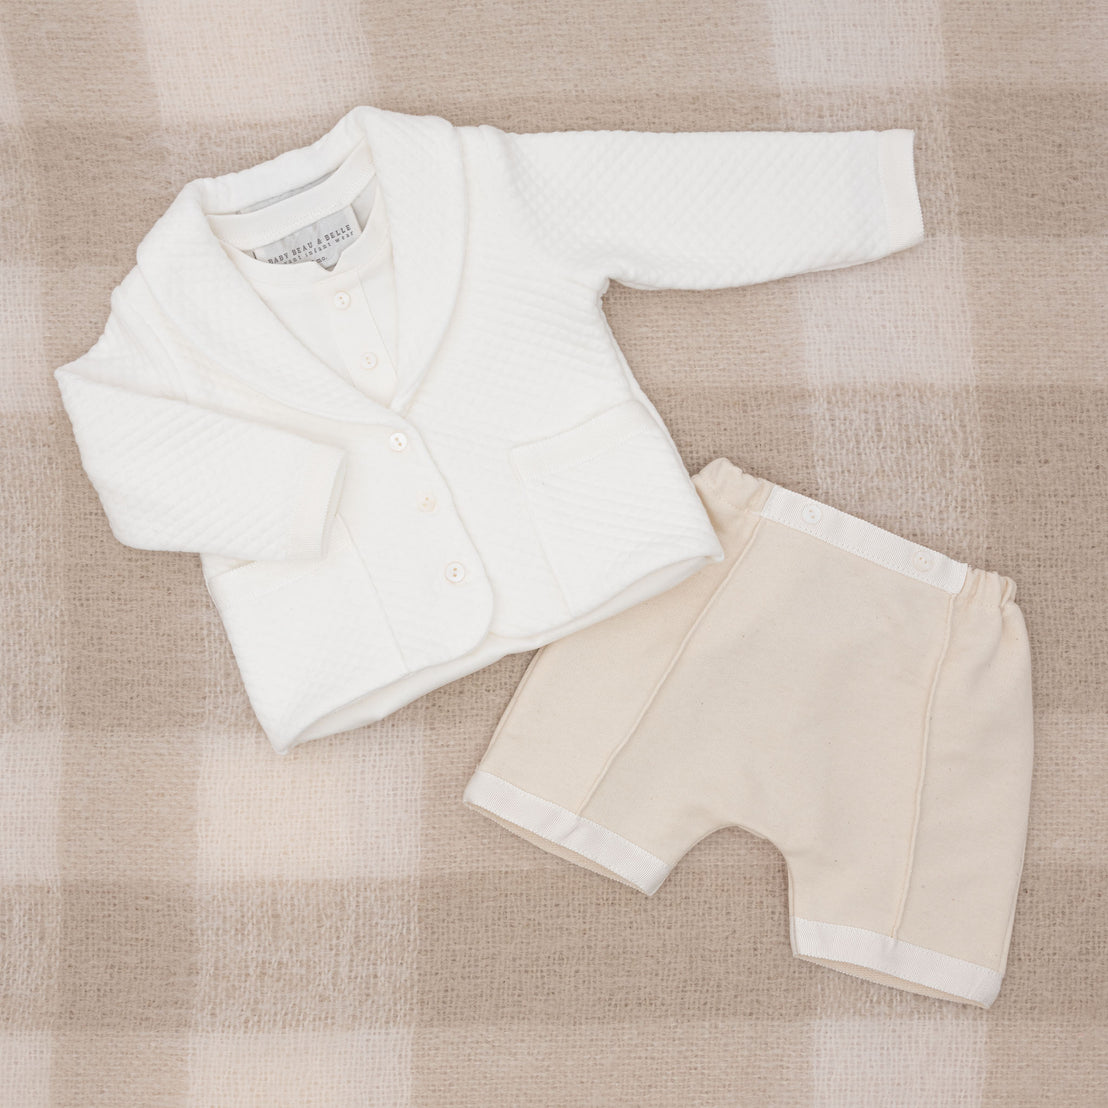 Flat lay photo of the Braden 3-Piece Suit, including the jacket, shorts, and onesie